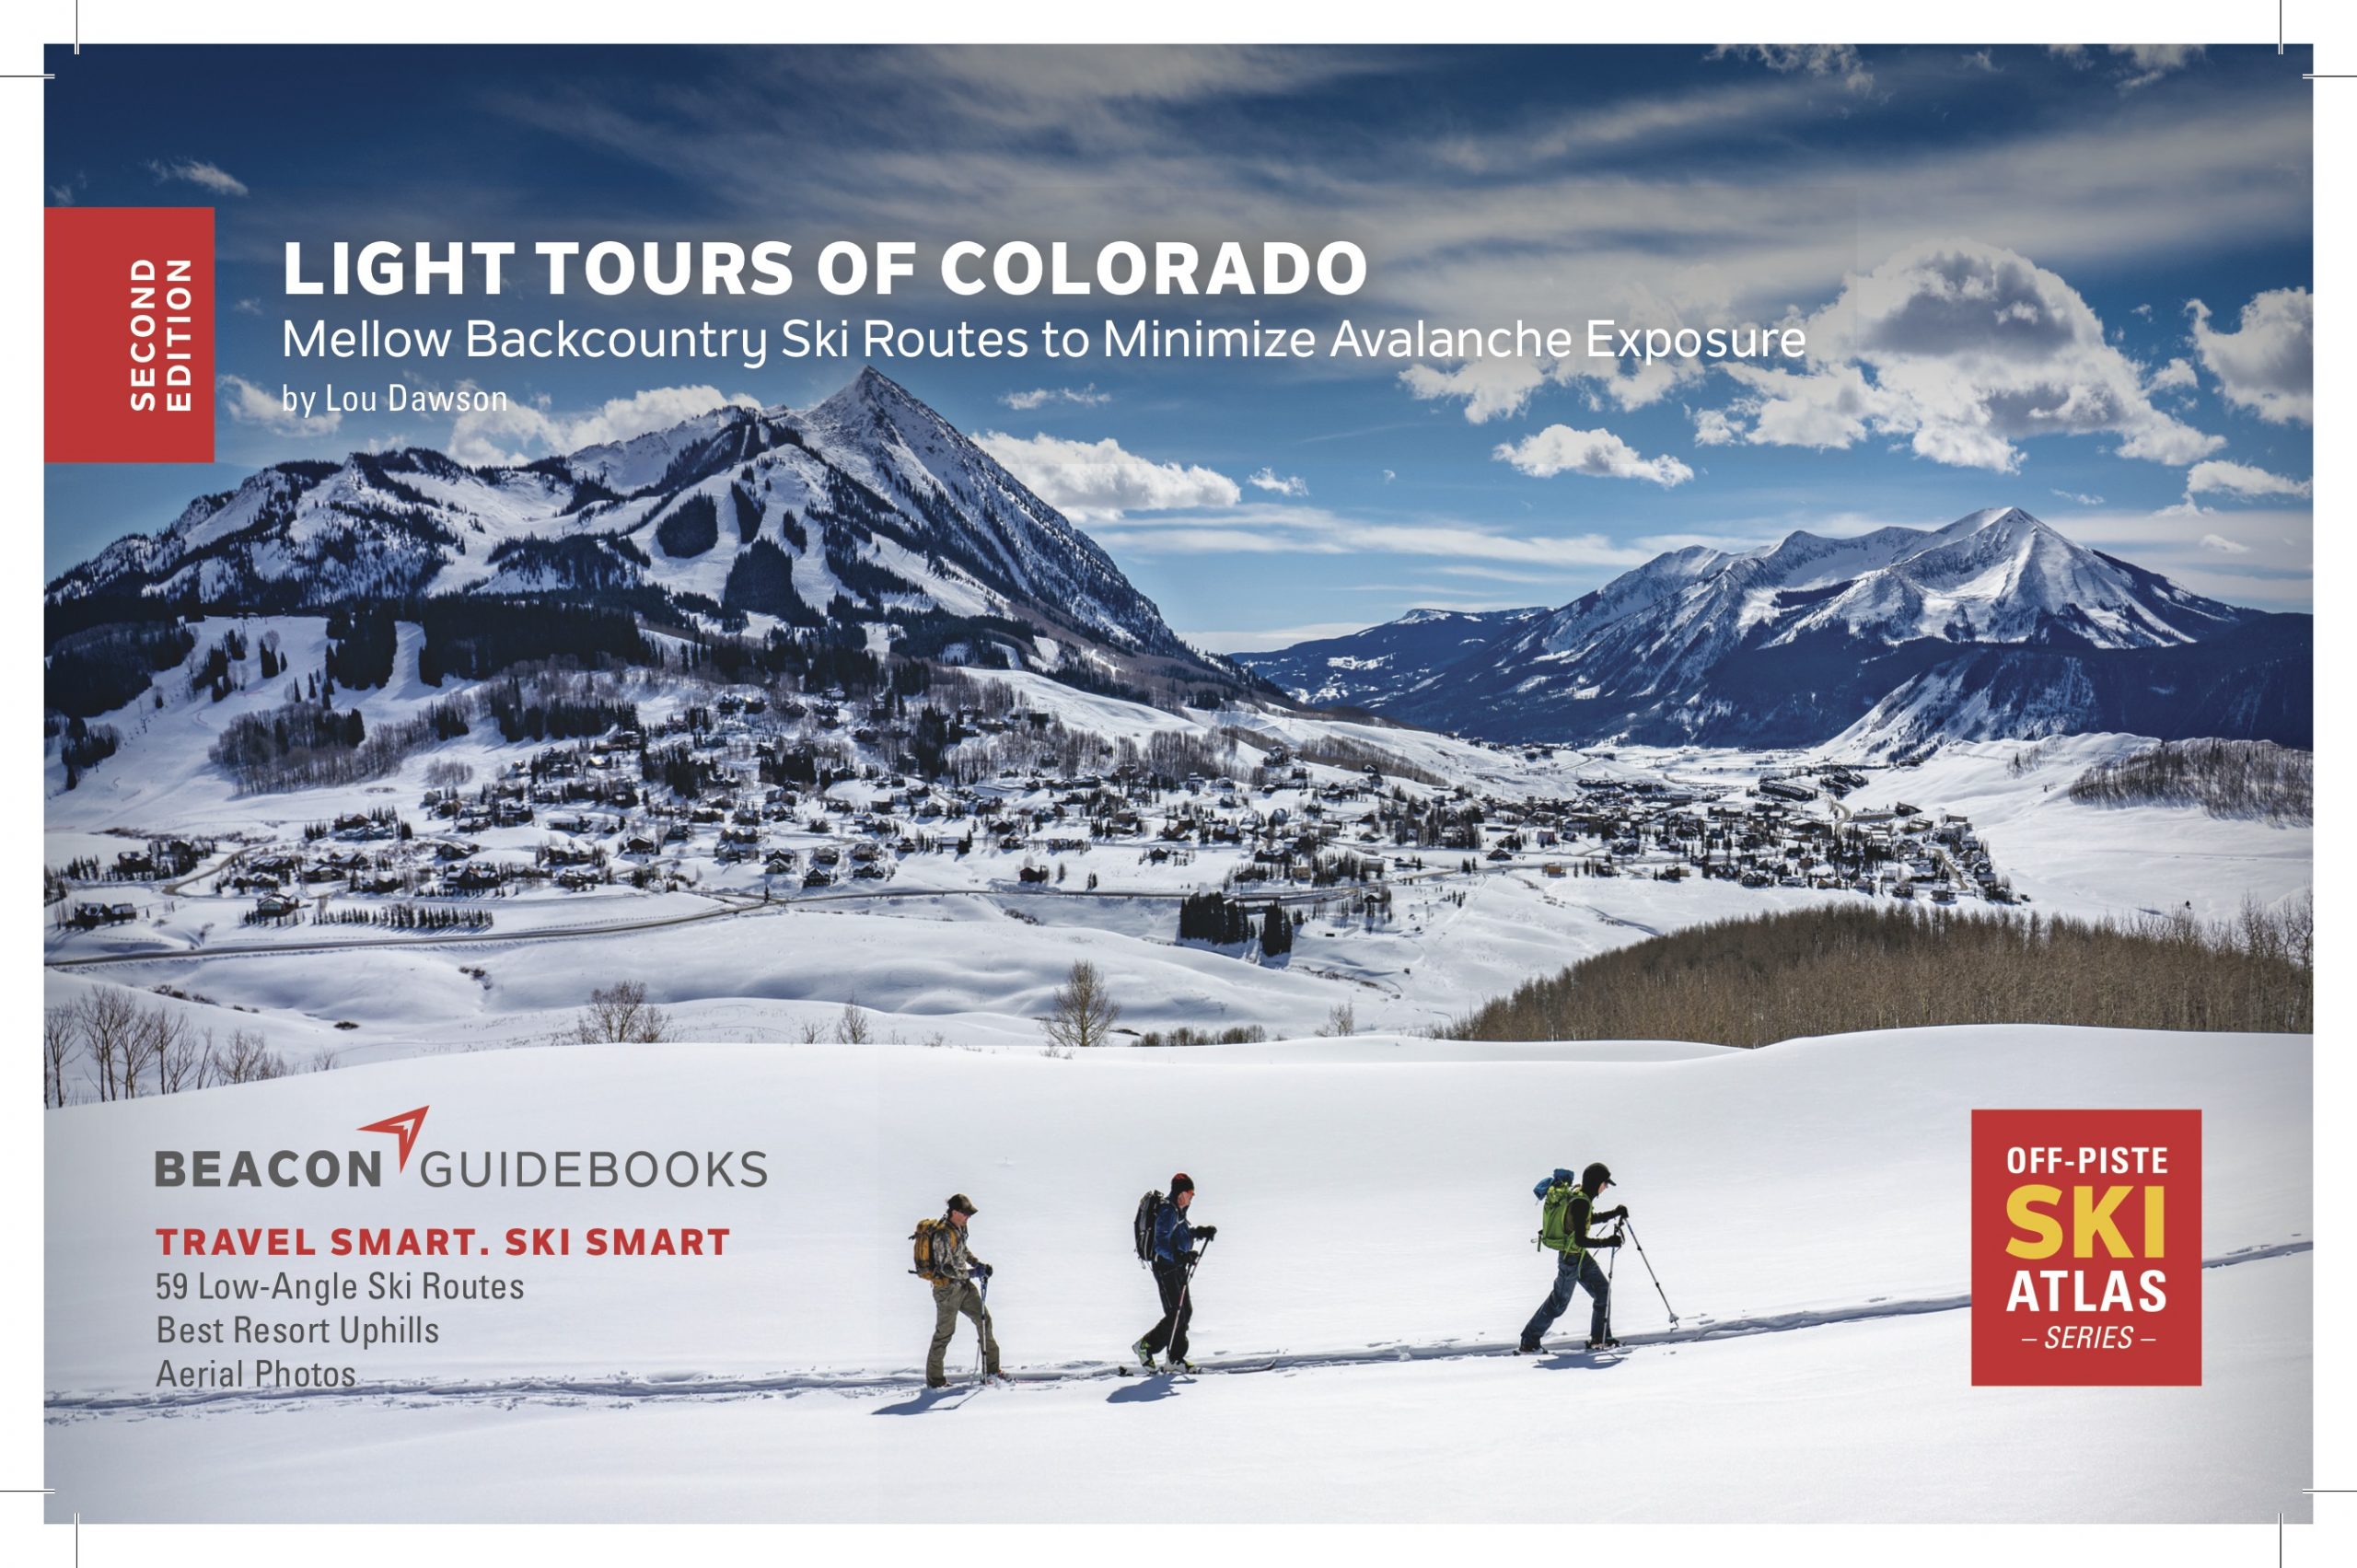 On the Blister Podcast, we talk to WildSnow.com founder, Lou Dawson about the history and current state of backcountry skiing, and his new guidebook, Light Tours of Colorado, published by Beacon Guidebooks.